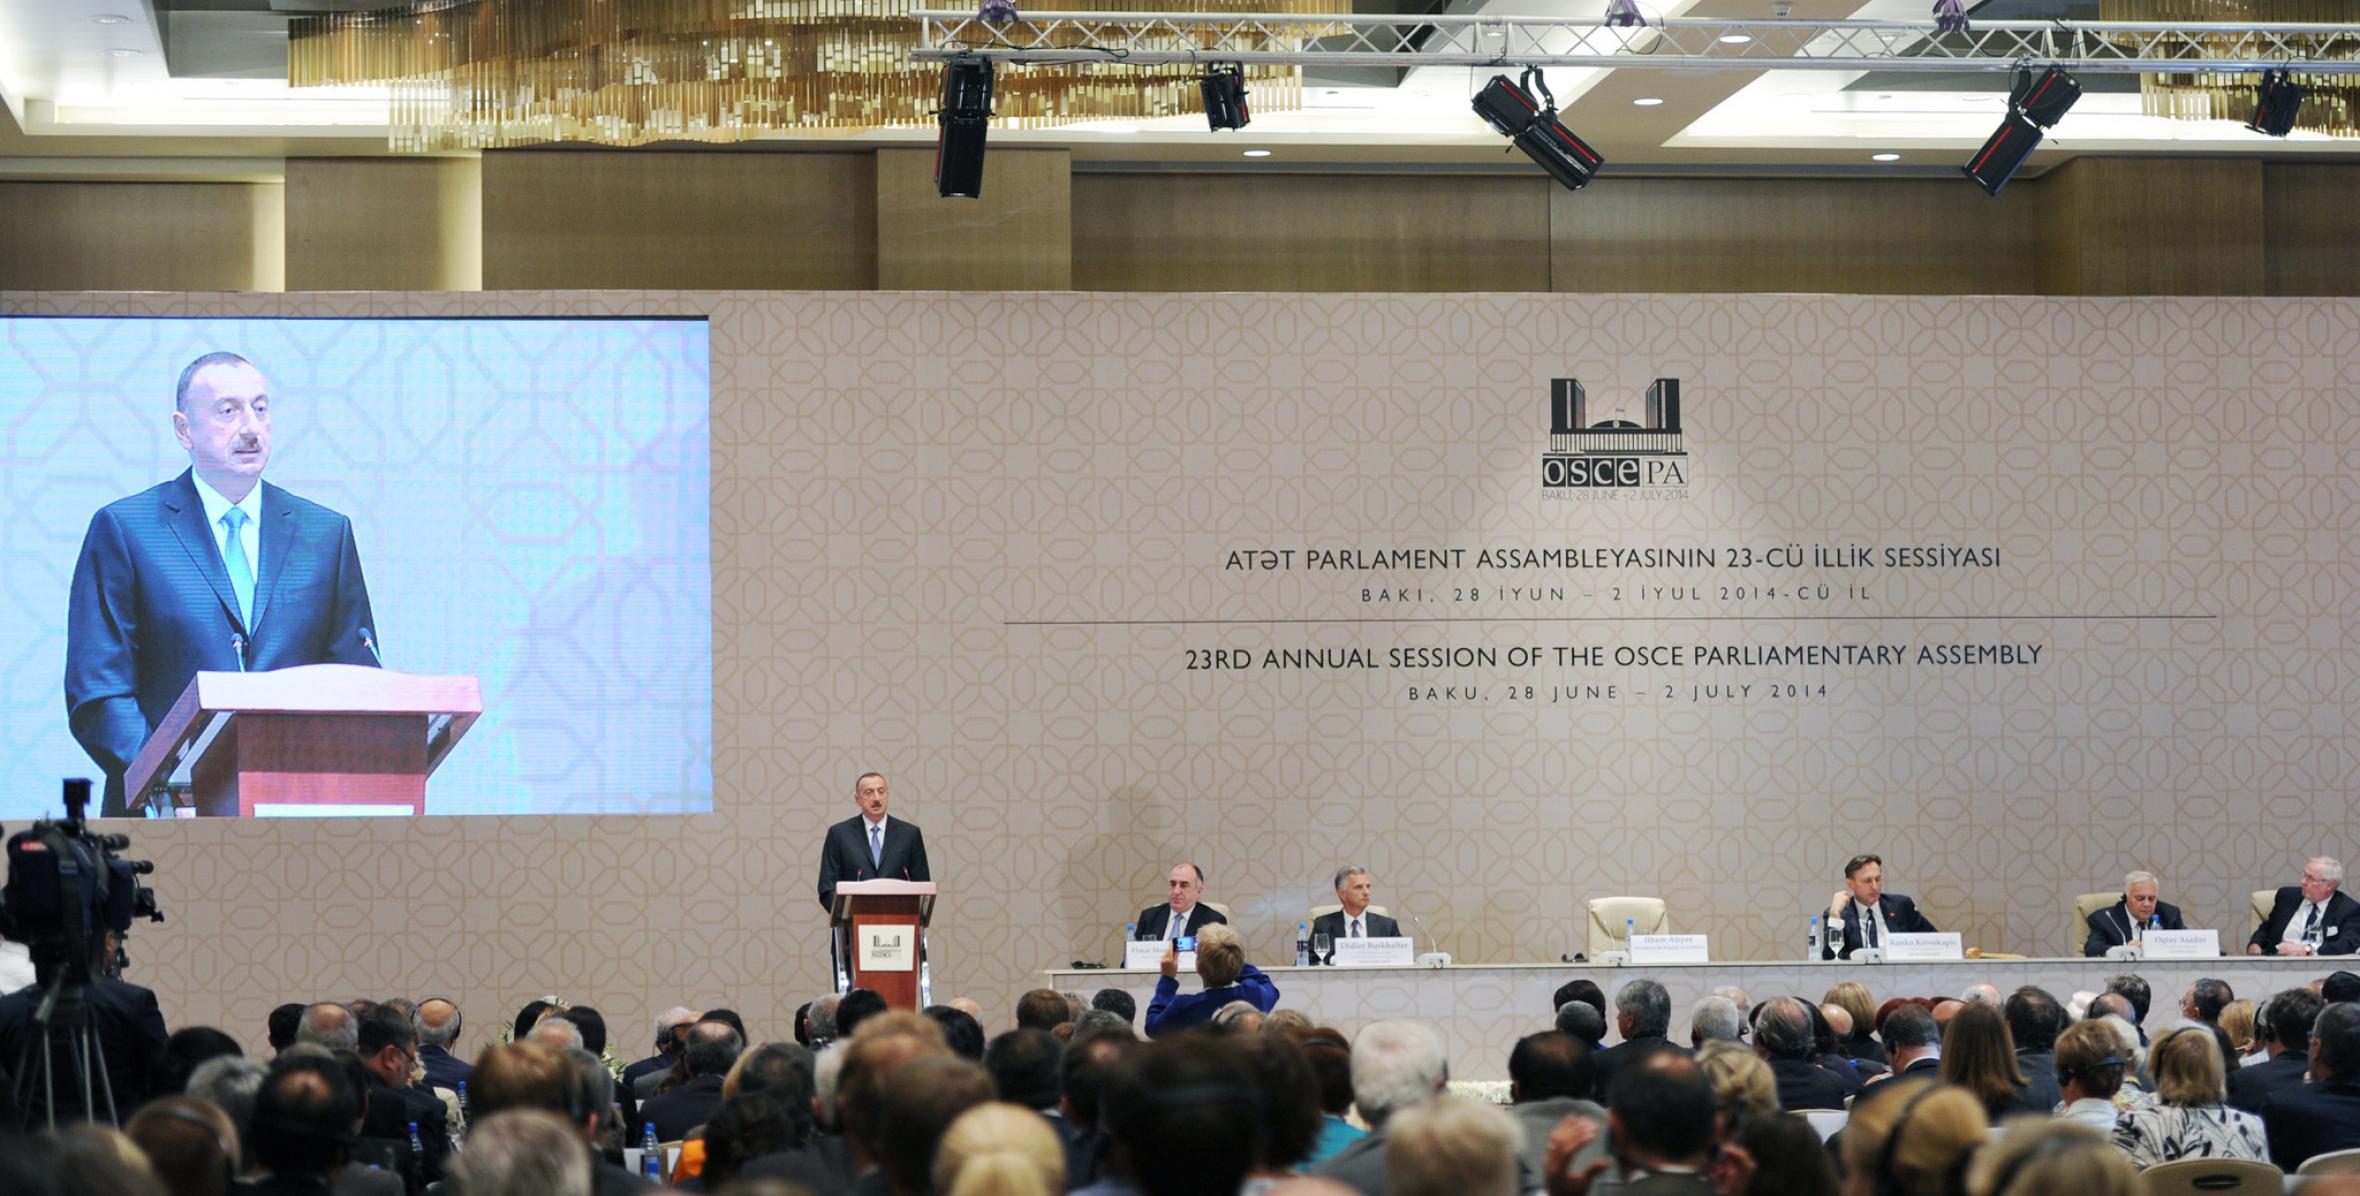 Speech by Ilham Aliyev at the Inaugural Plenary Session of the 23rd Annual Session of the OSCE PA